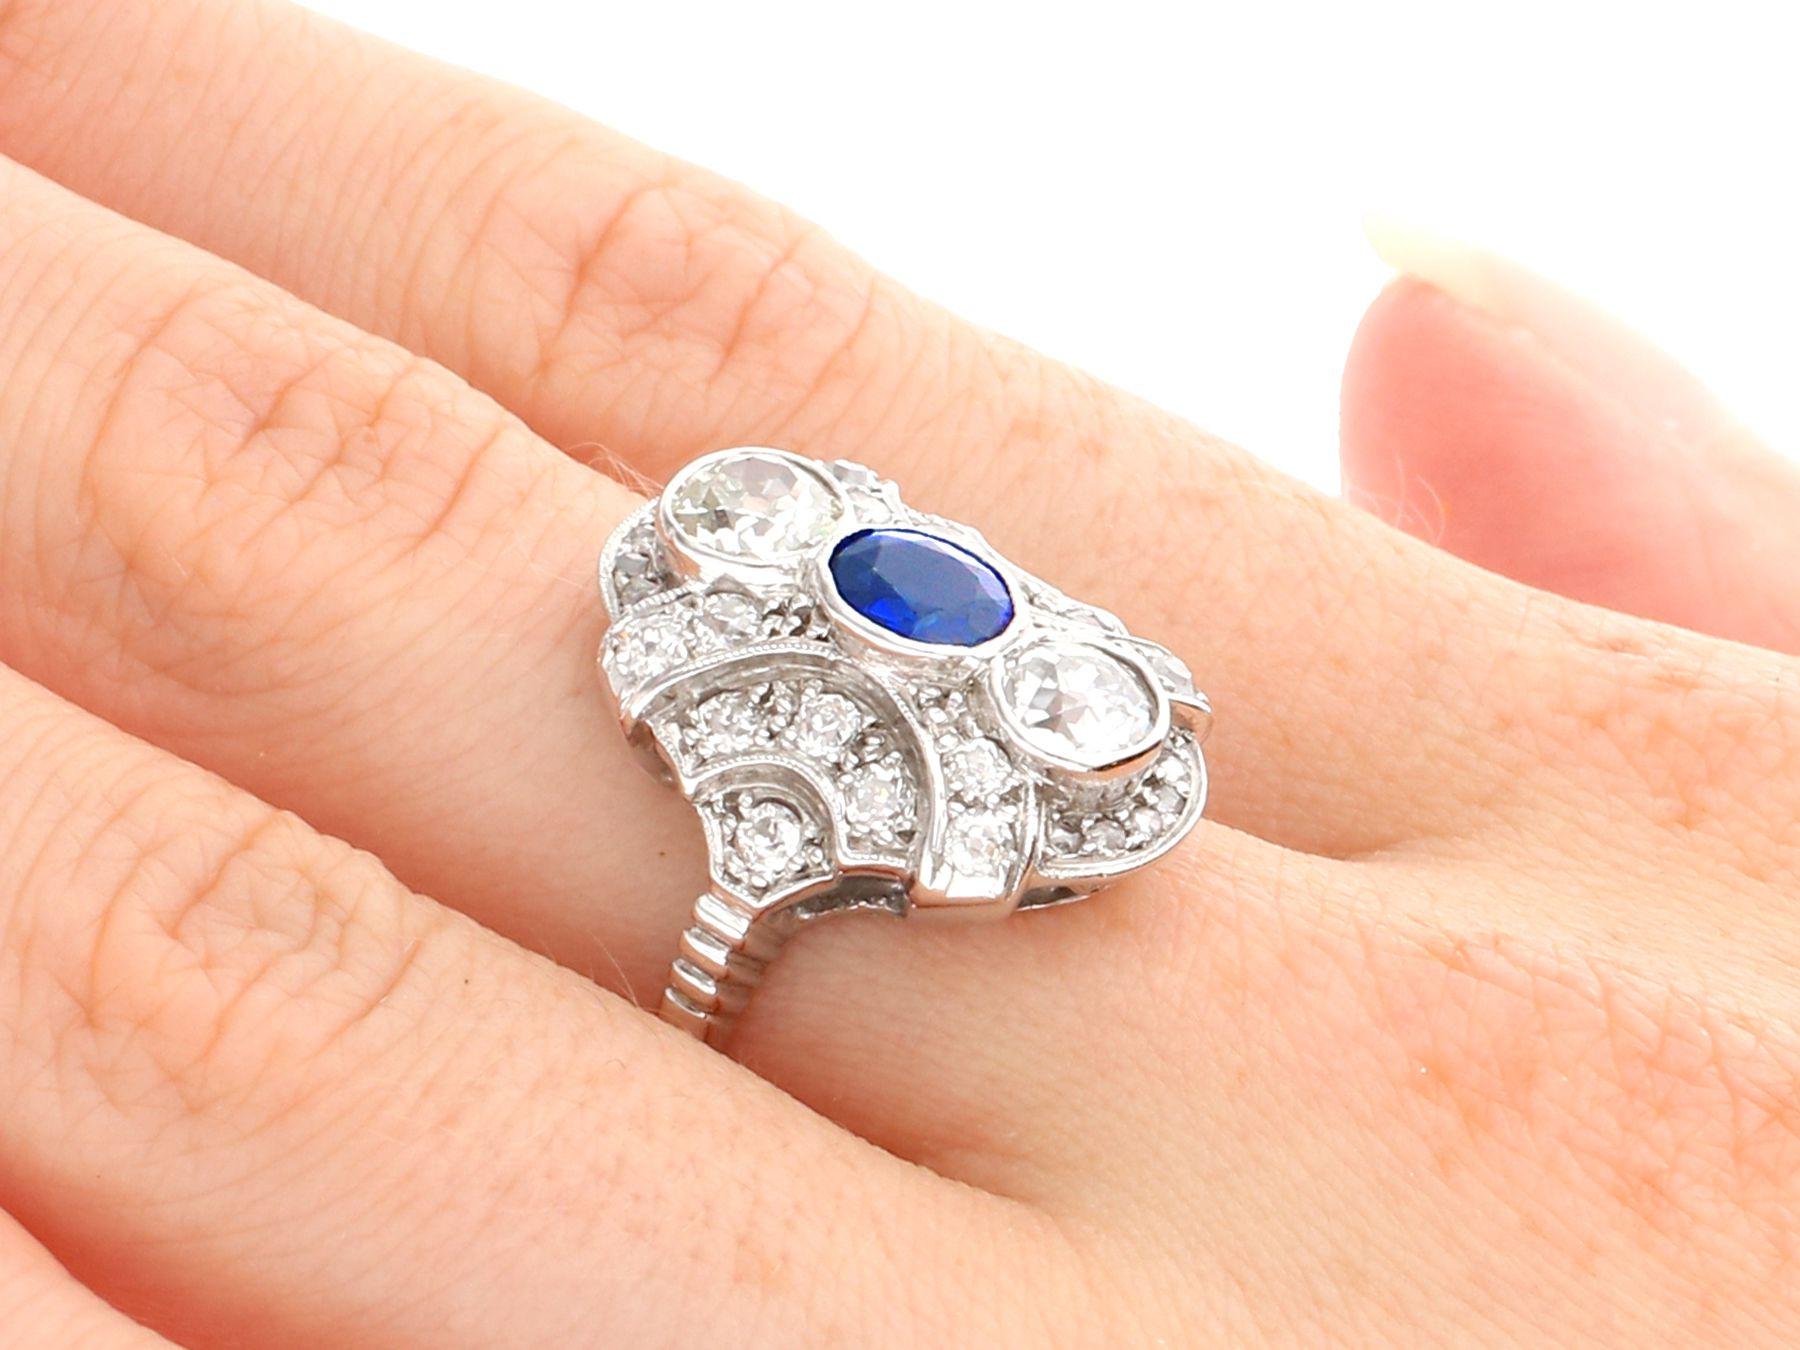 Antique Sapphire and 1.64 Carat Diamond White Gold Cocktail Ring, circa 1935 For Sale 2